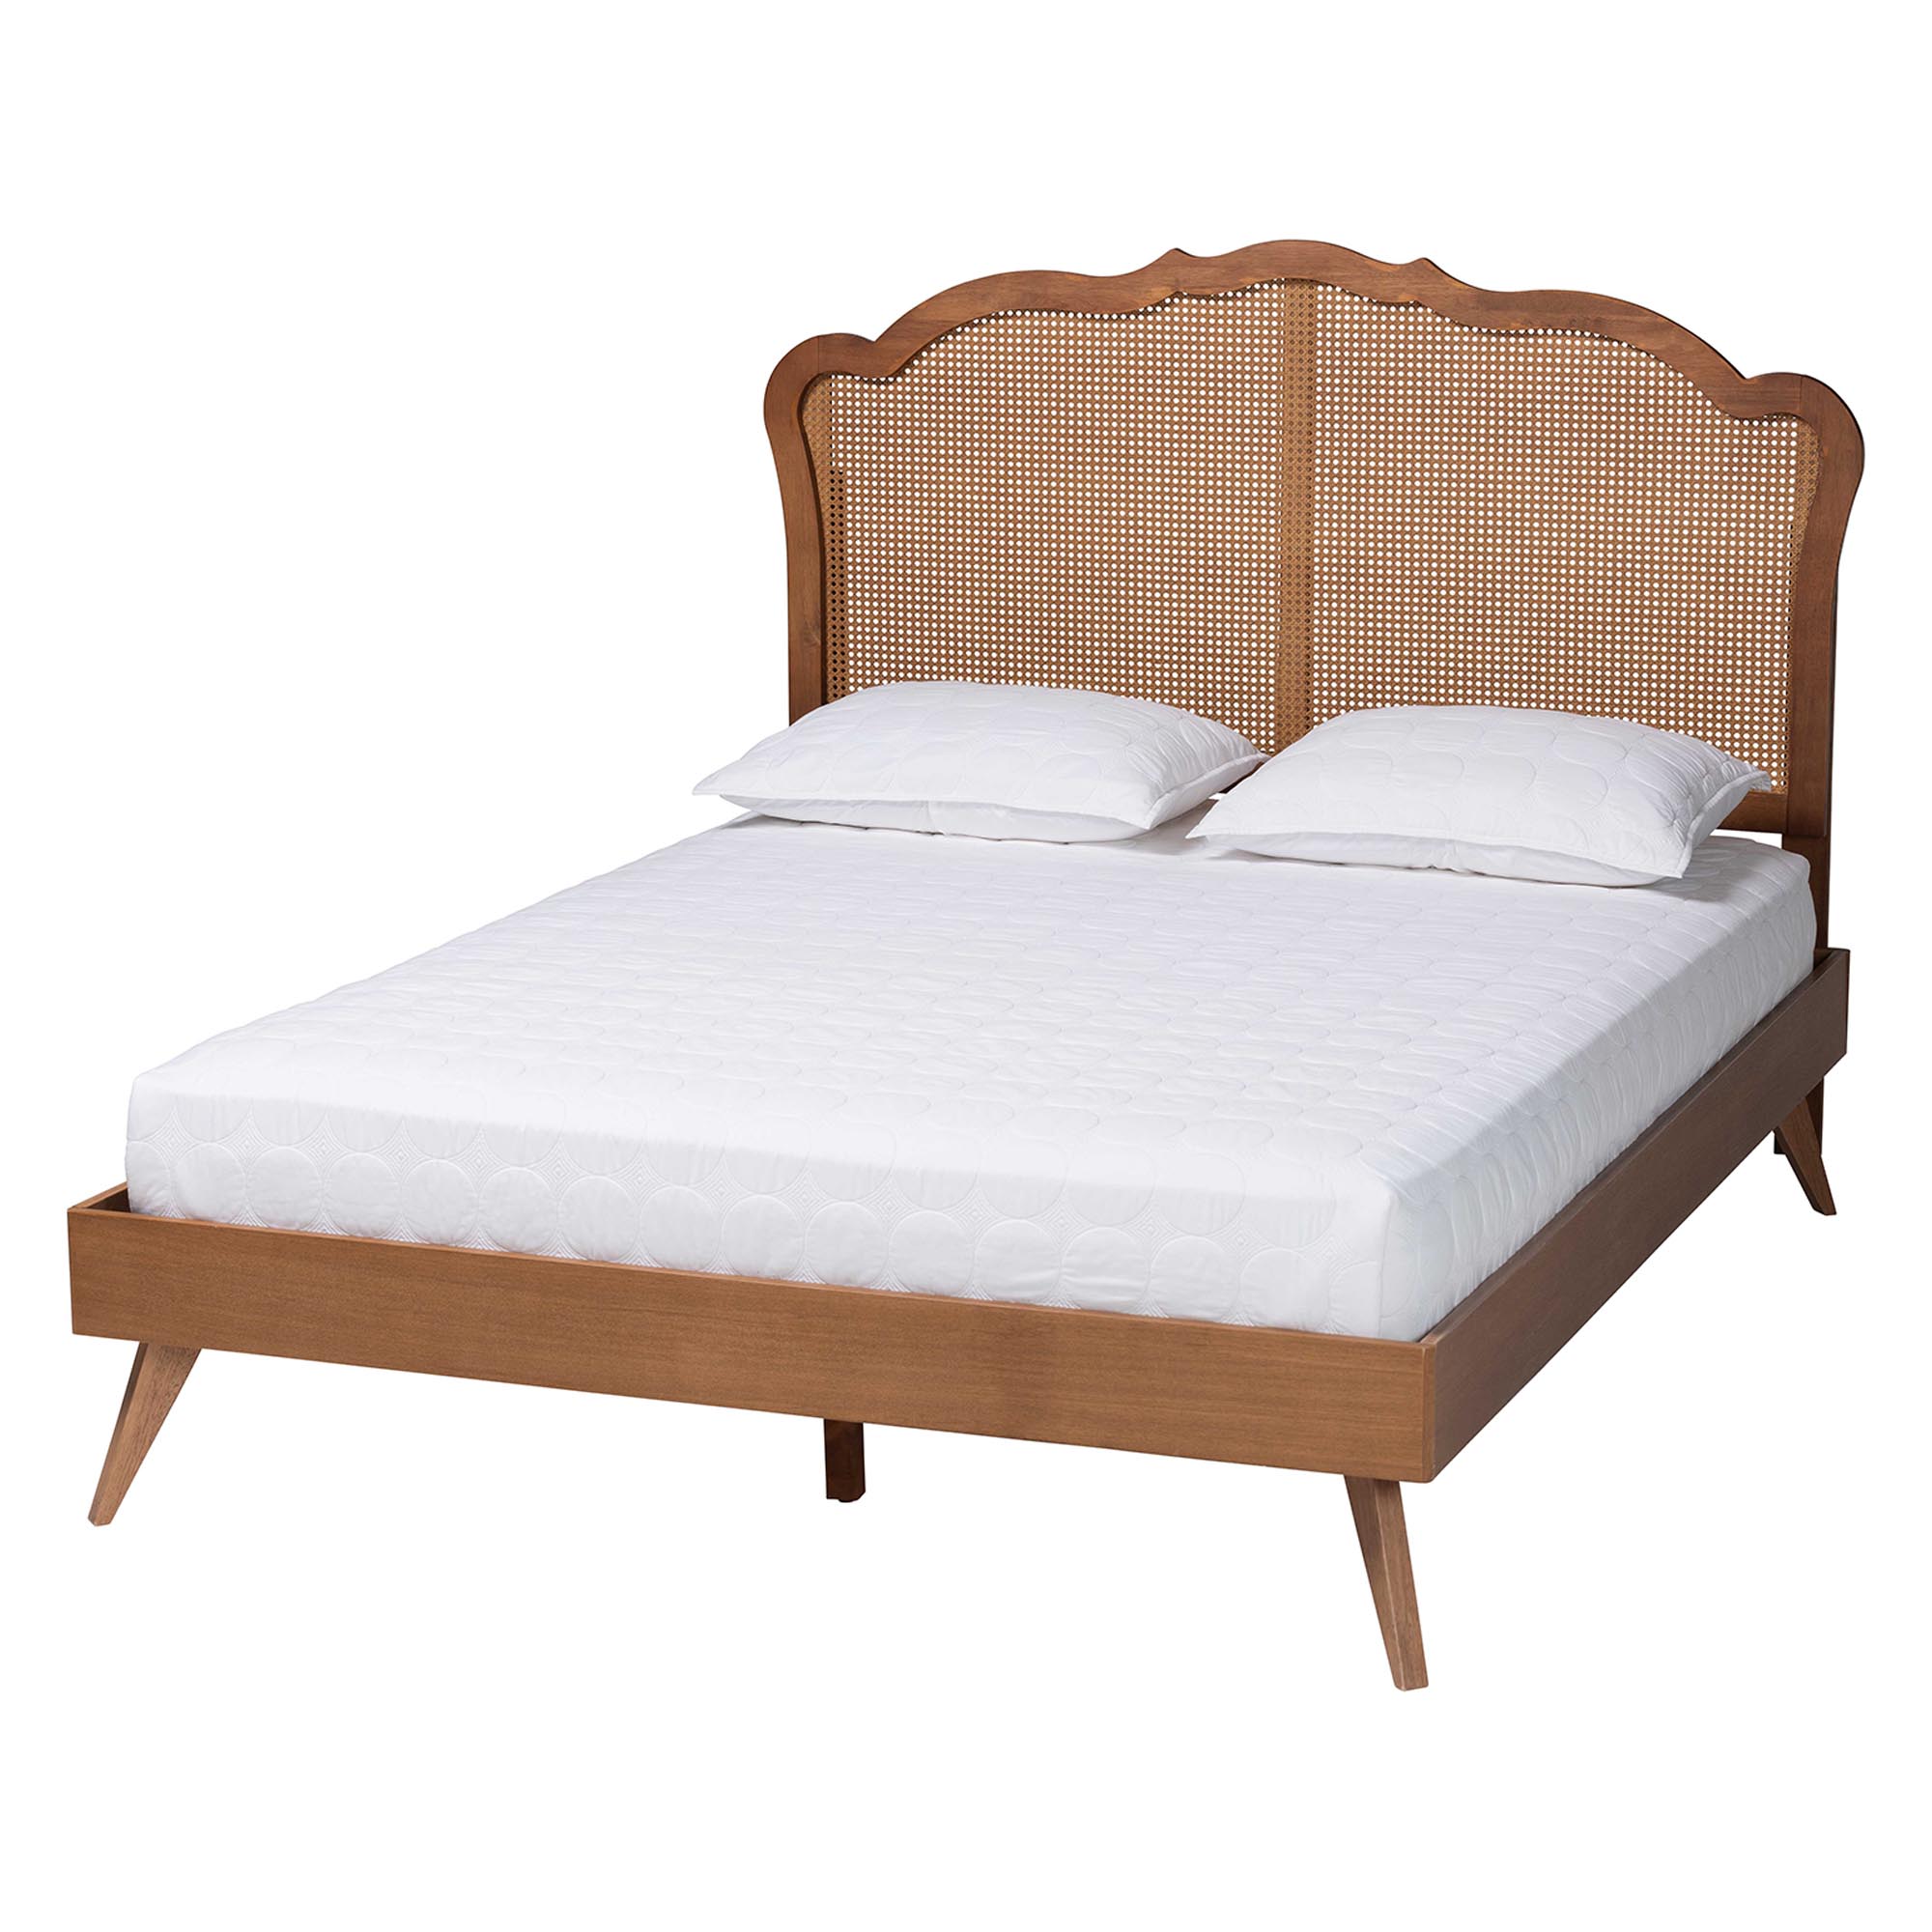 Baxton Studio Aithan Mid-Century Walnut Brown Wood and Rattan Queen Size Platform Bed Affordable modern furniture in Chicago, classic bedroom furniture, modern queen size, cheap queen size